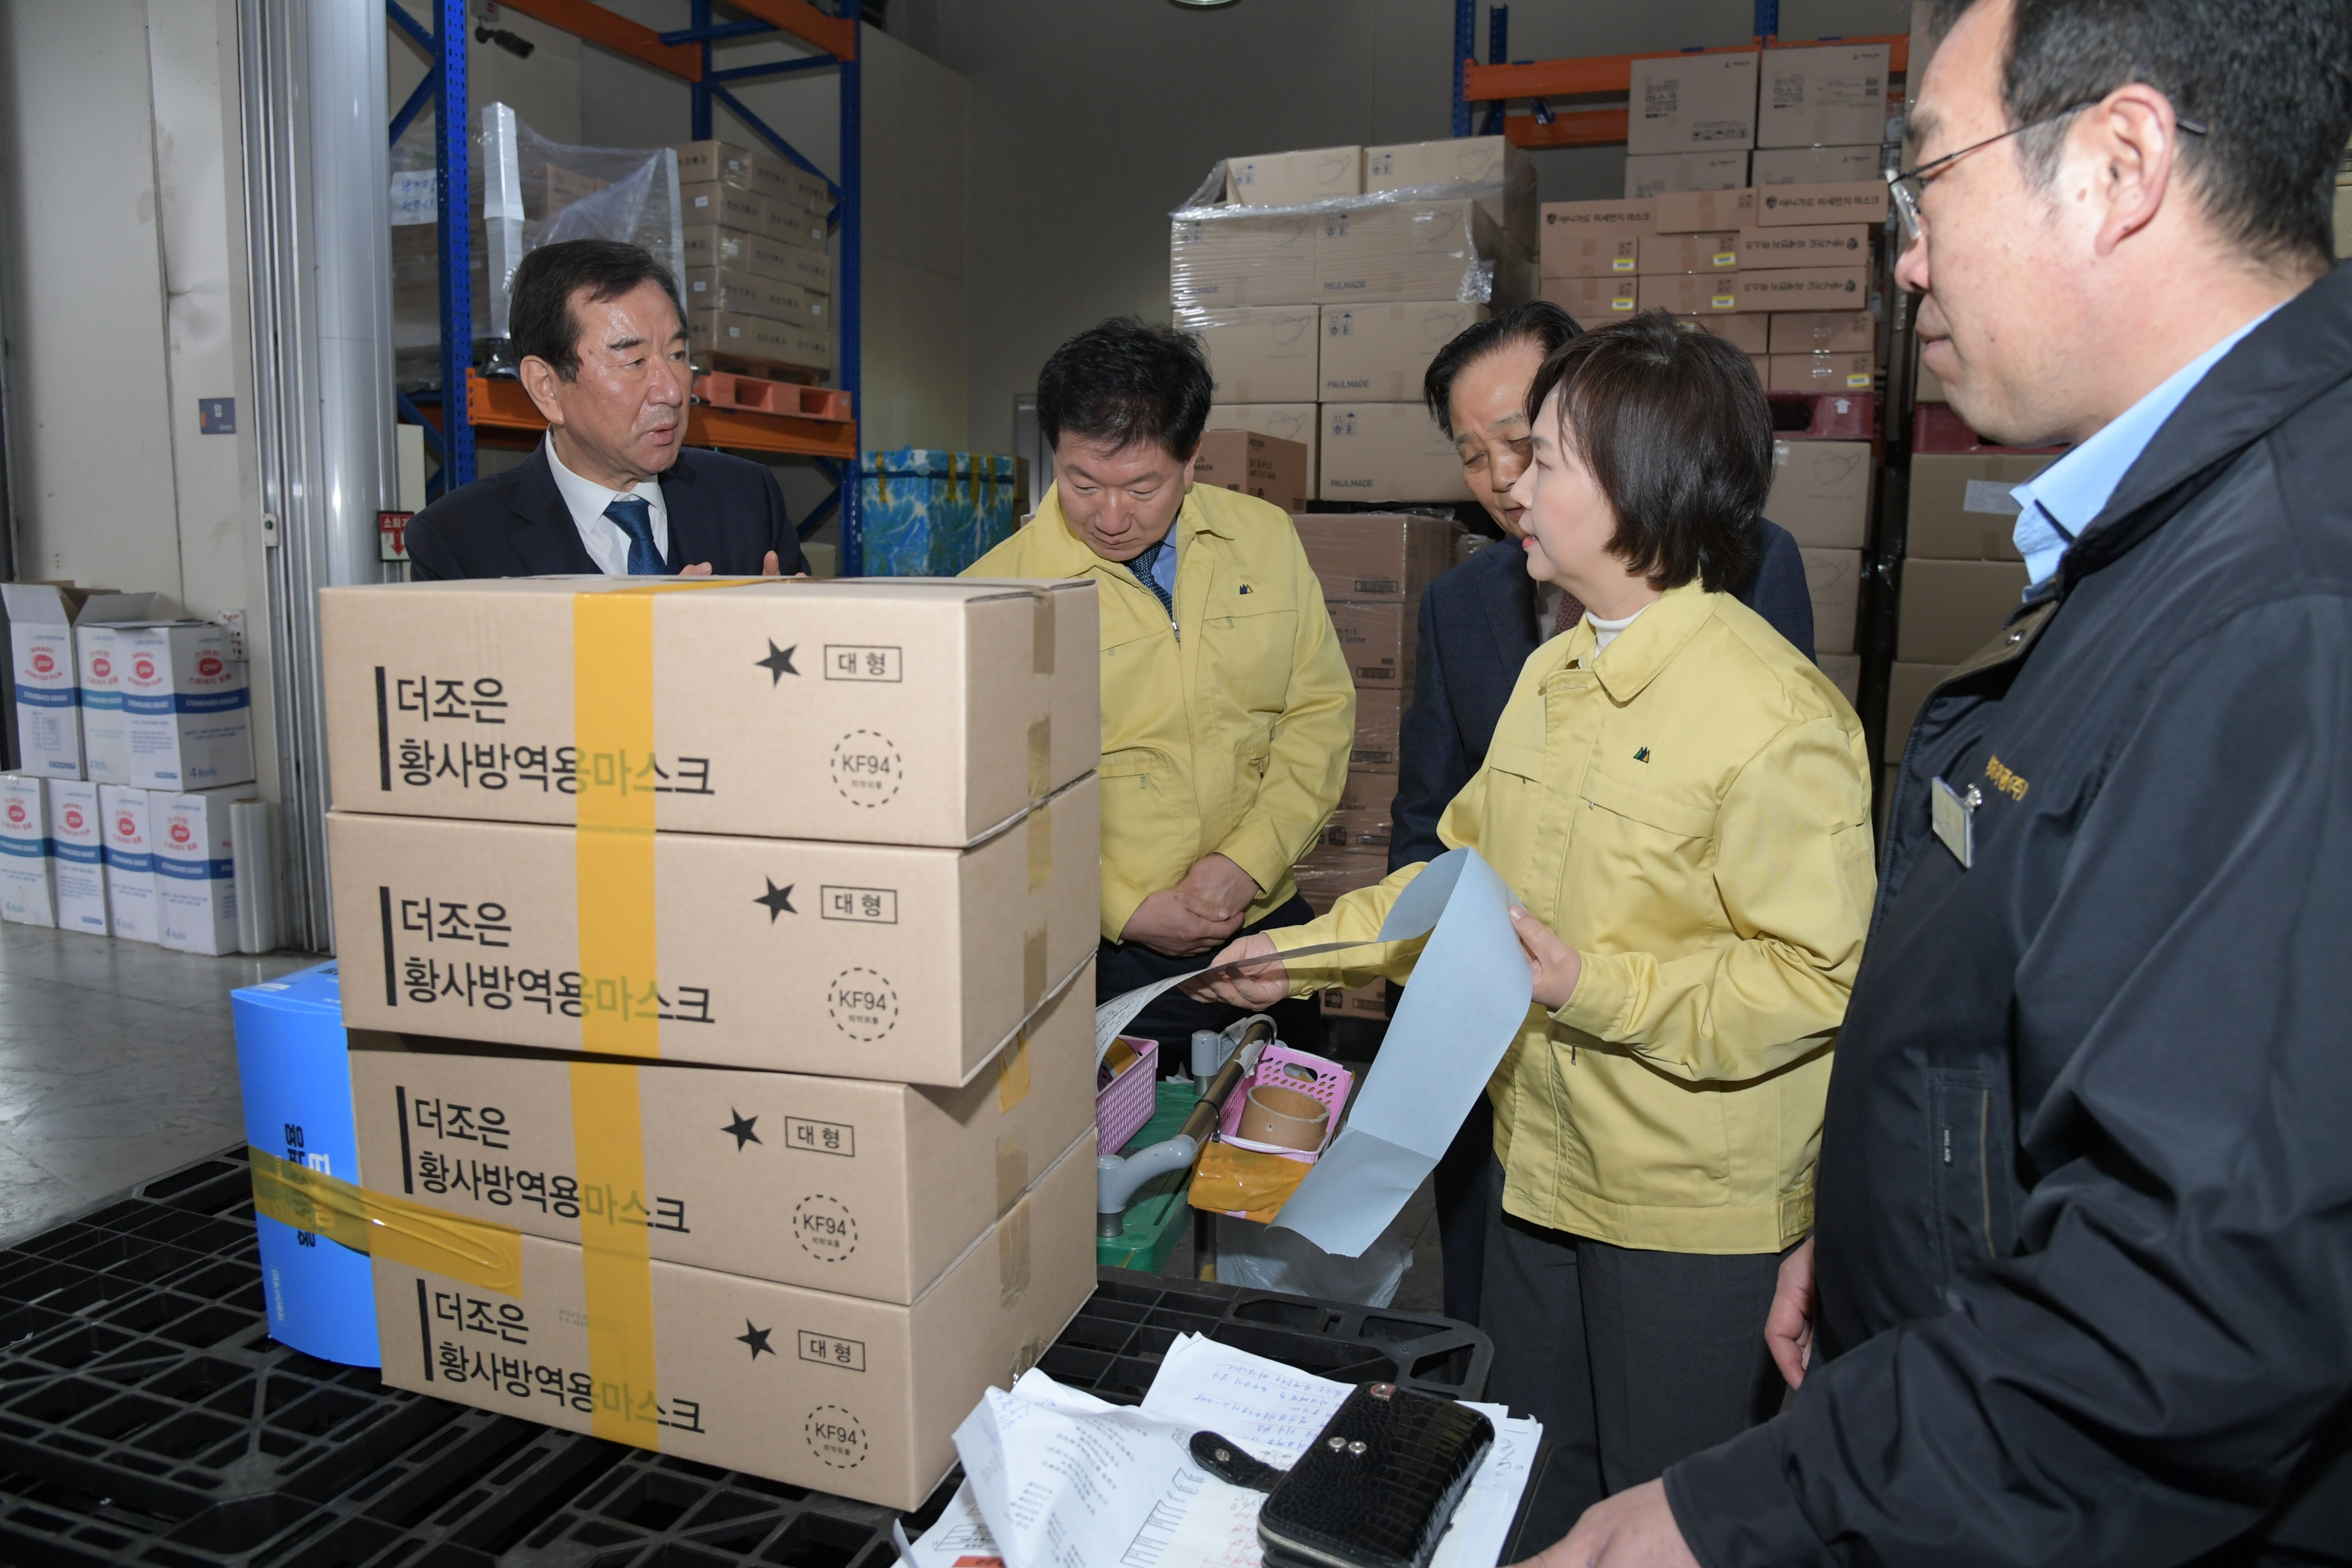 Photo News3 - [Mar. 10, 2020] Minister conducts inspection of public mask distribution center